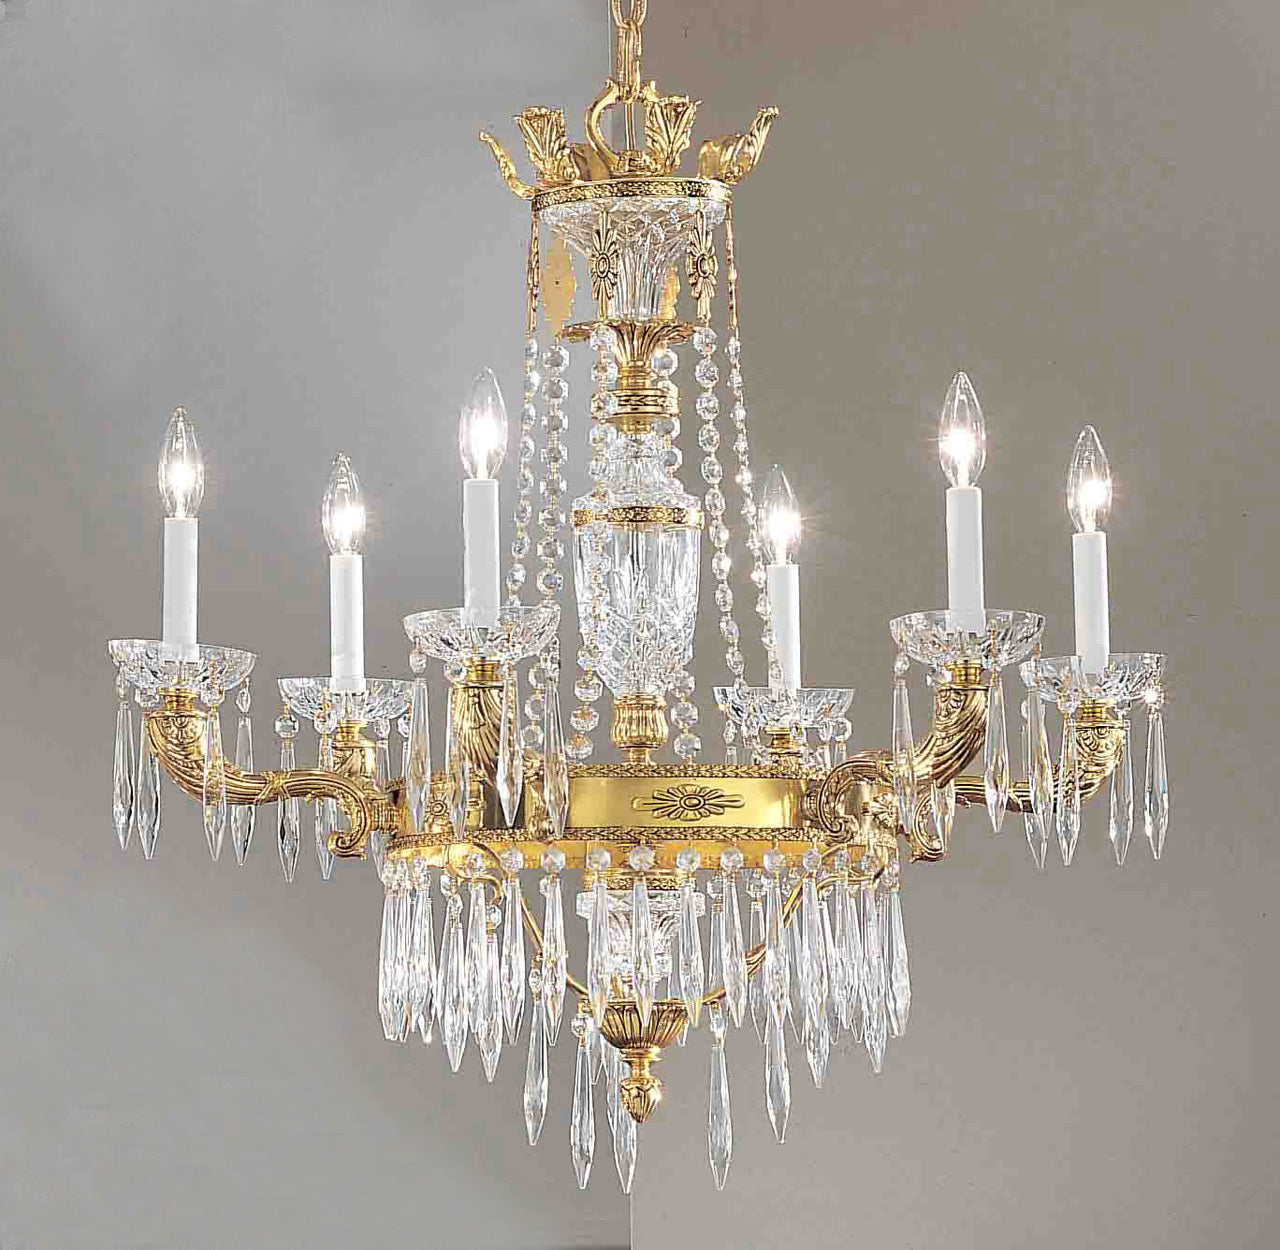 Classic Lighting 57316 BBK I Duchess Crystal Chandelier in Bronze/Black Patina (Imported from Spain)